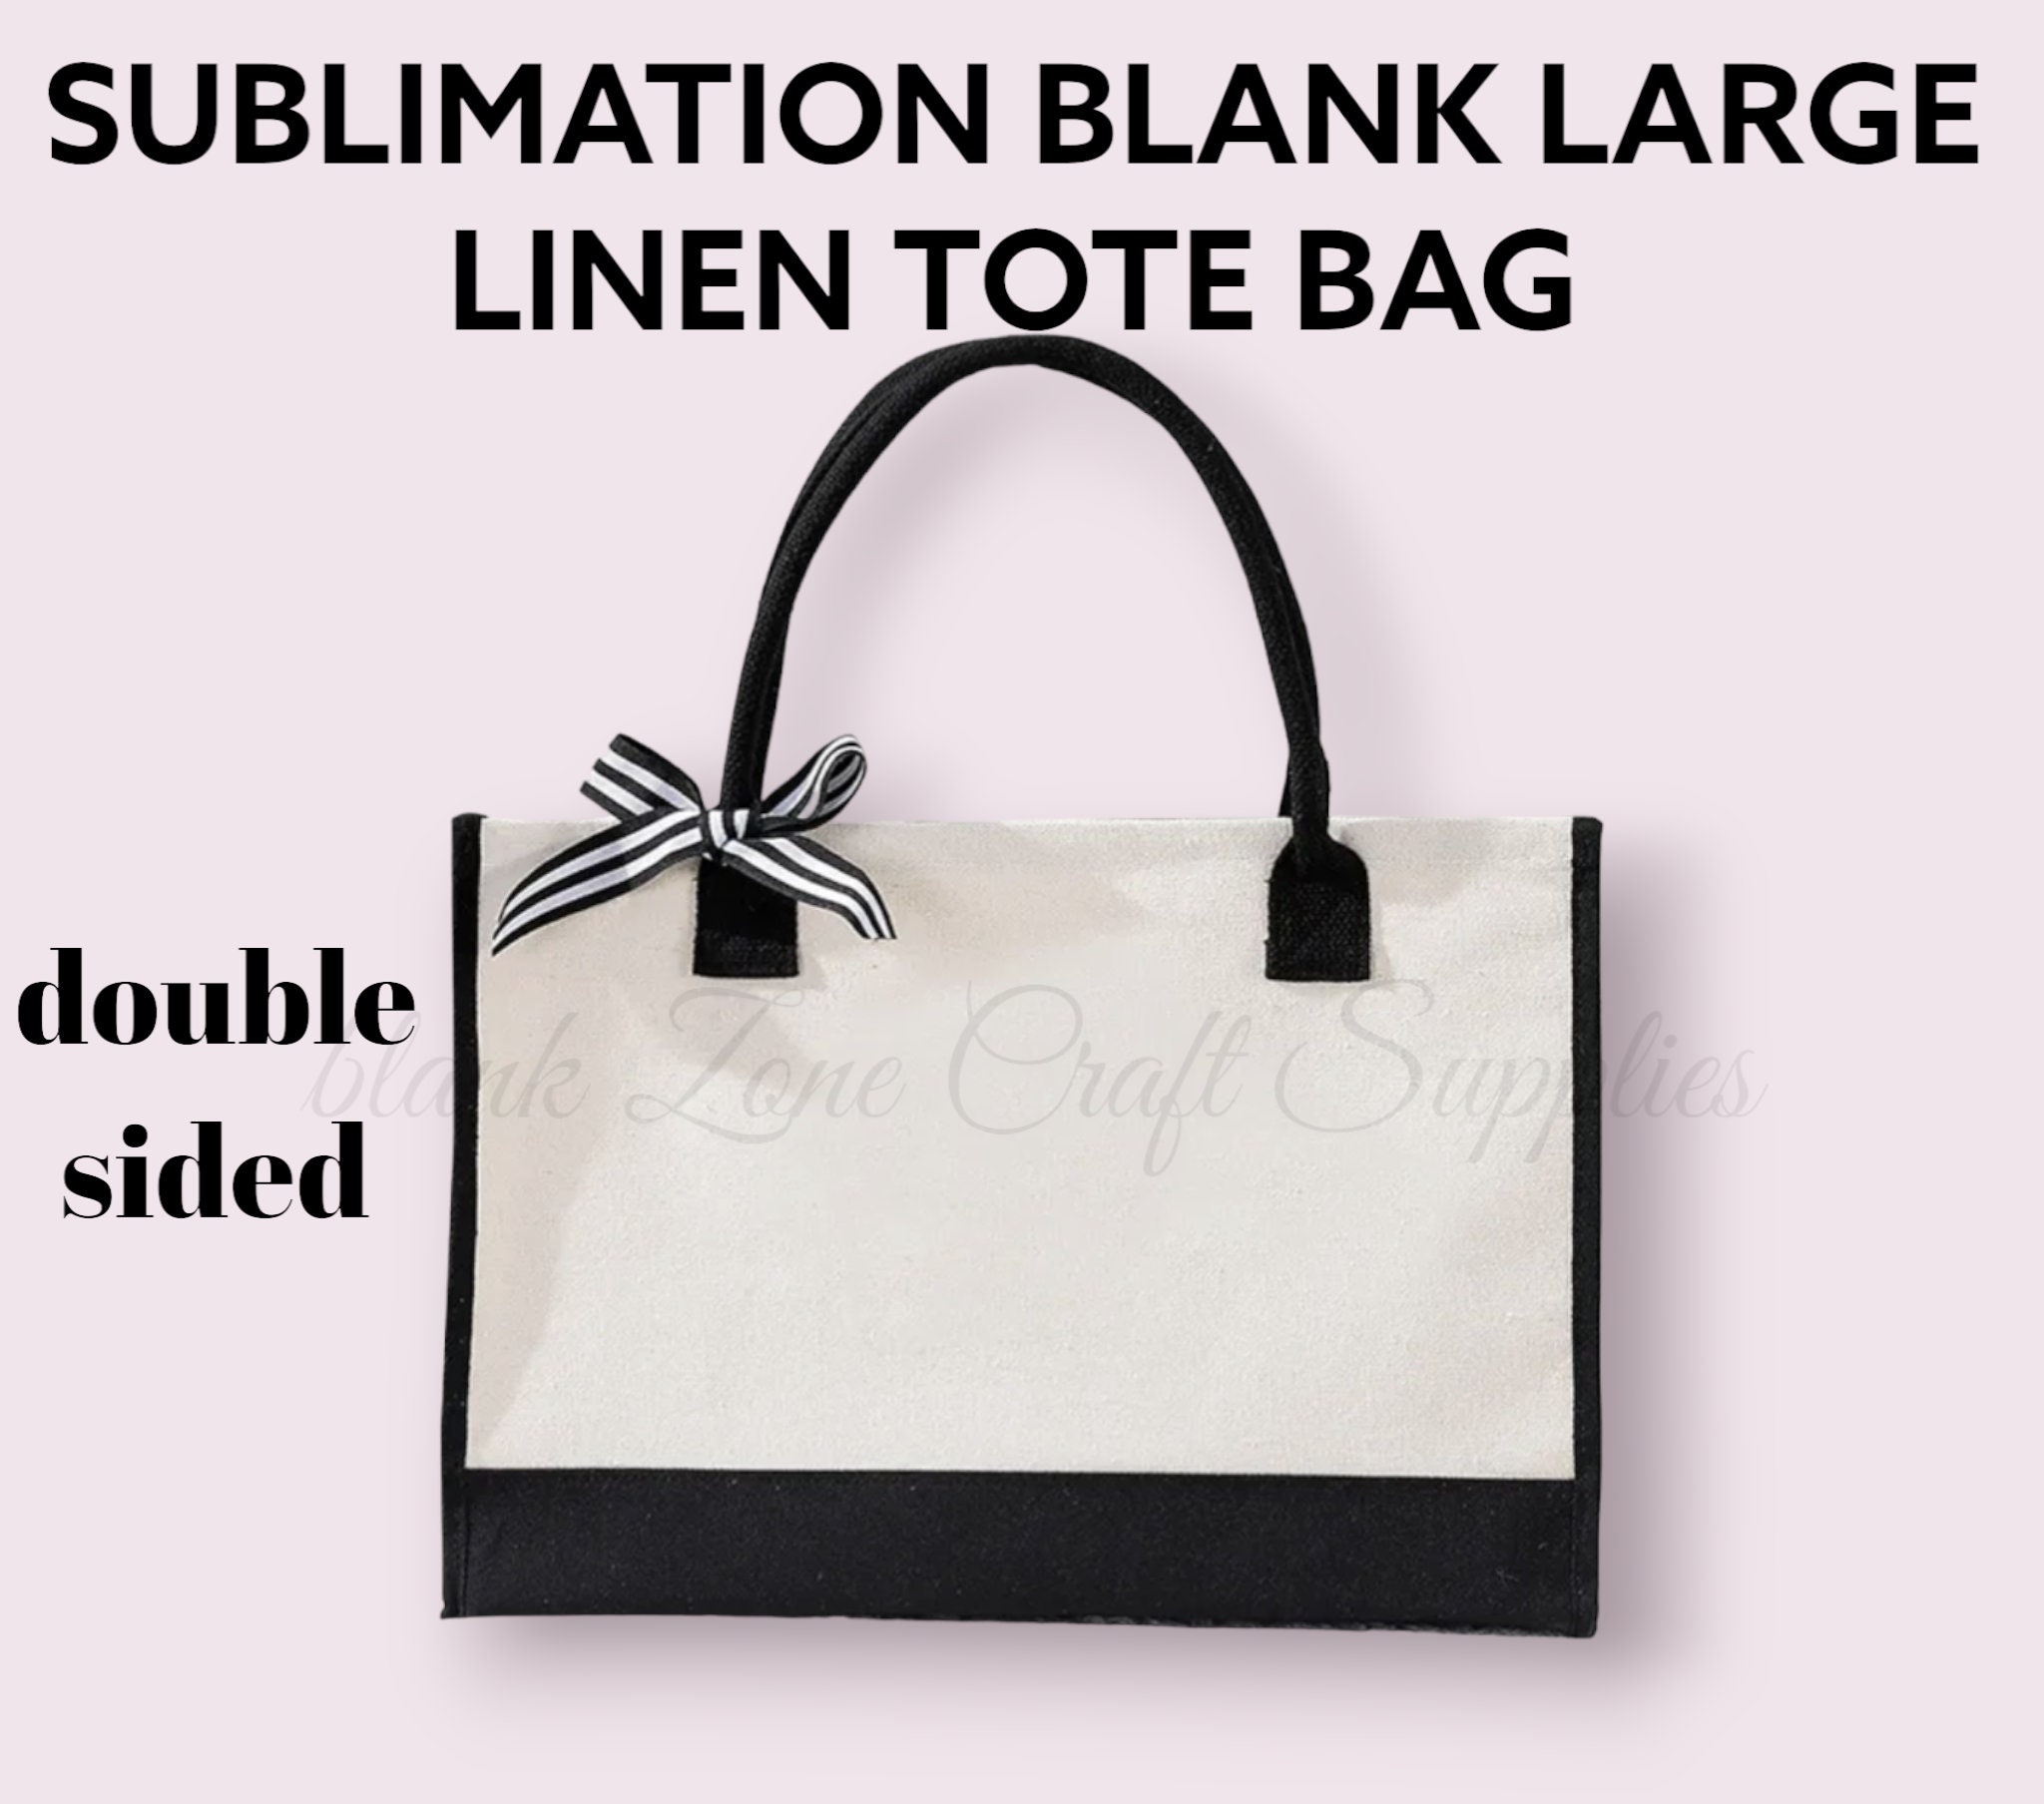 100% Polyester Tote Bag Sublimation Blank With Golden Zipper Thick